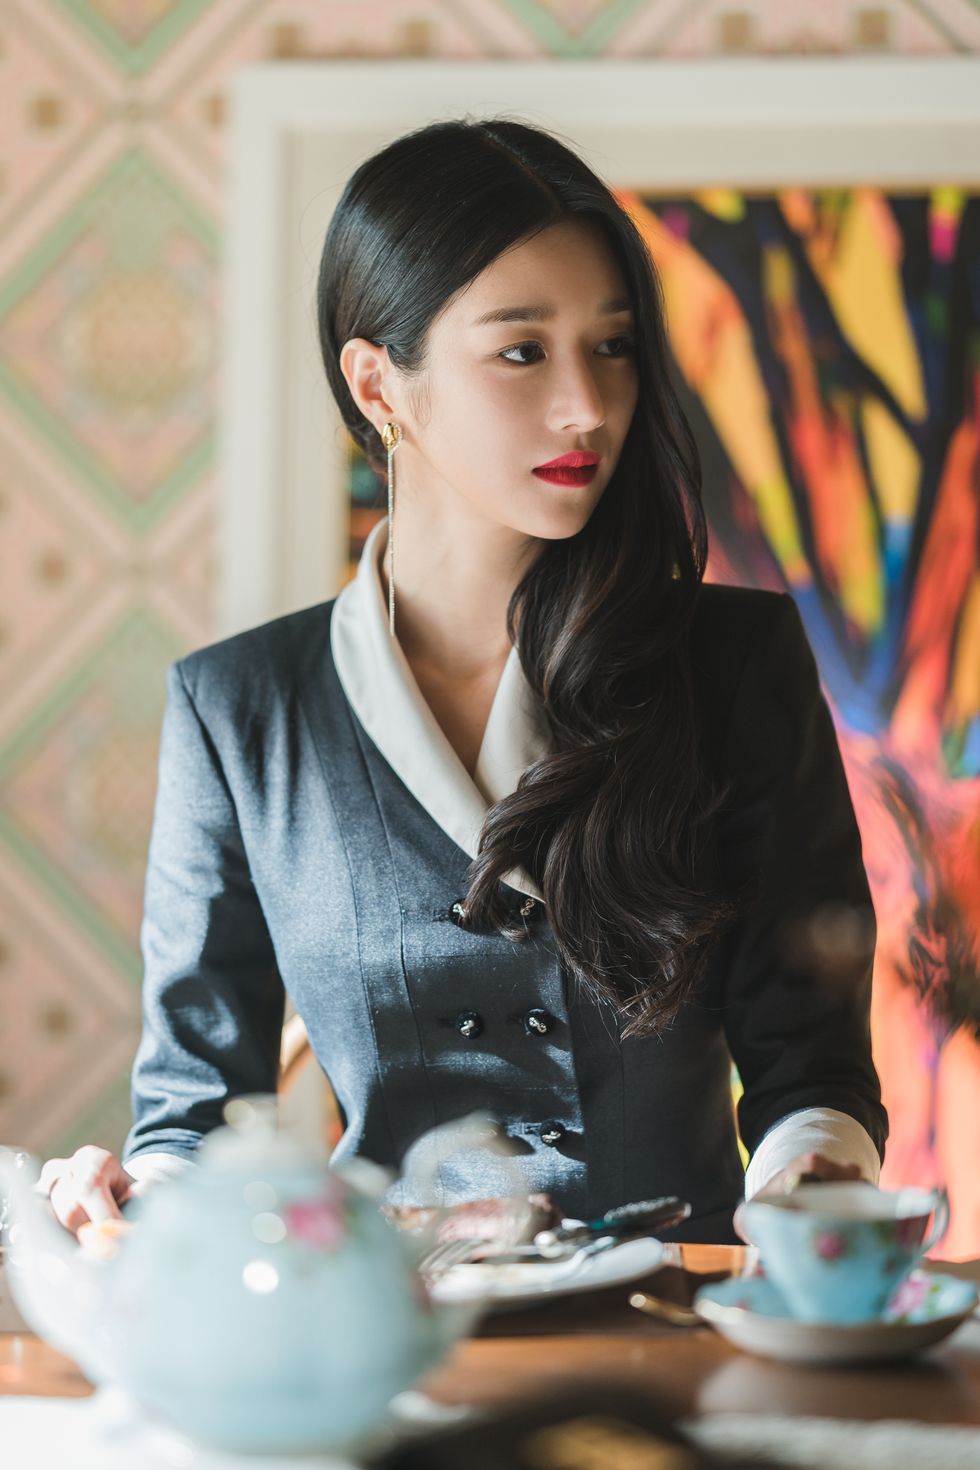 Beauty, Formal wear, Outerwear, Textile, Photography, Sitting, Black hair, Jacket, 